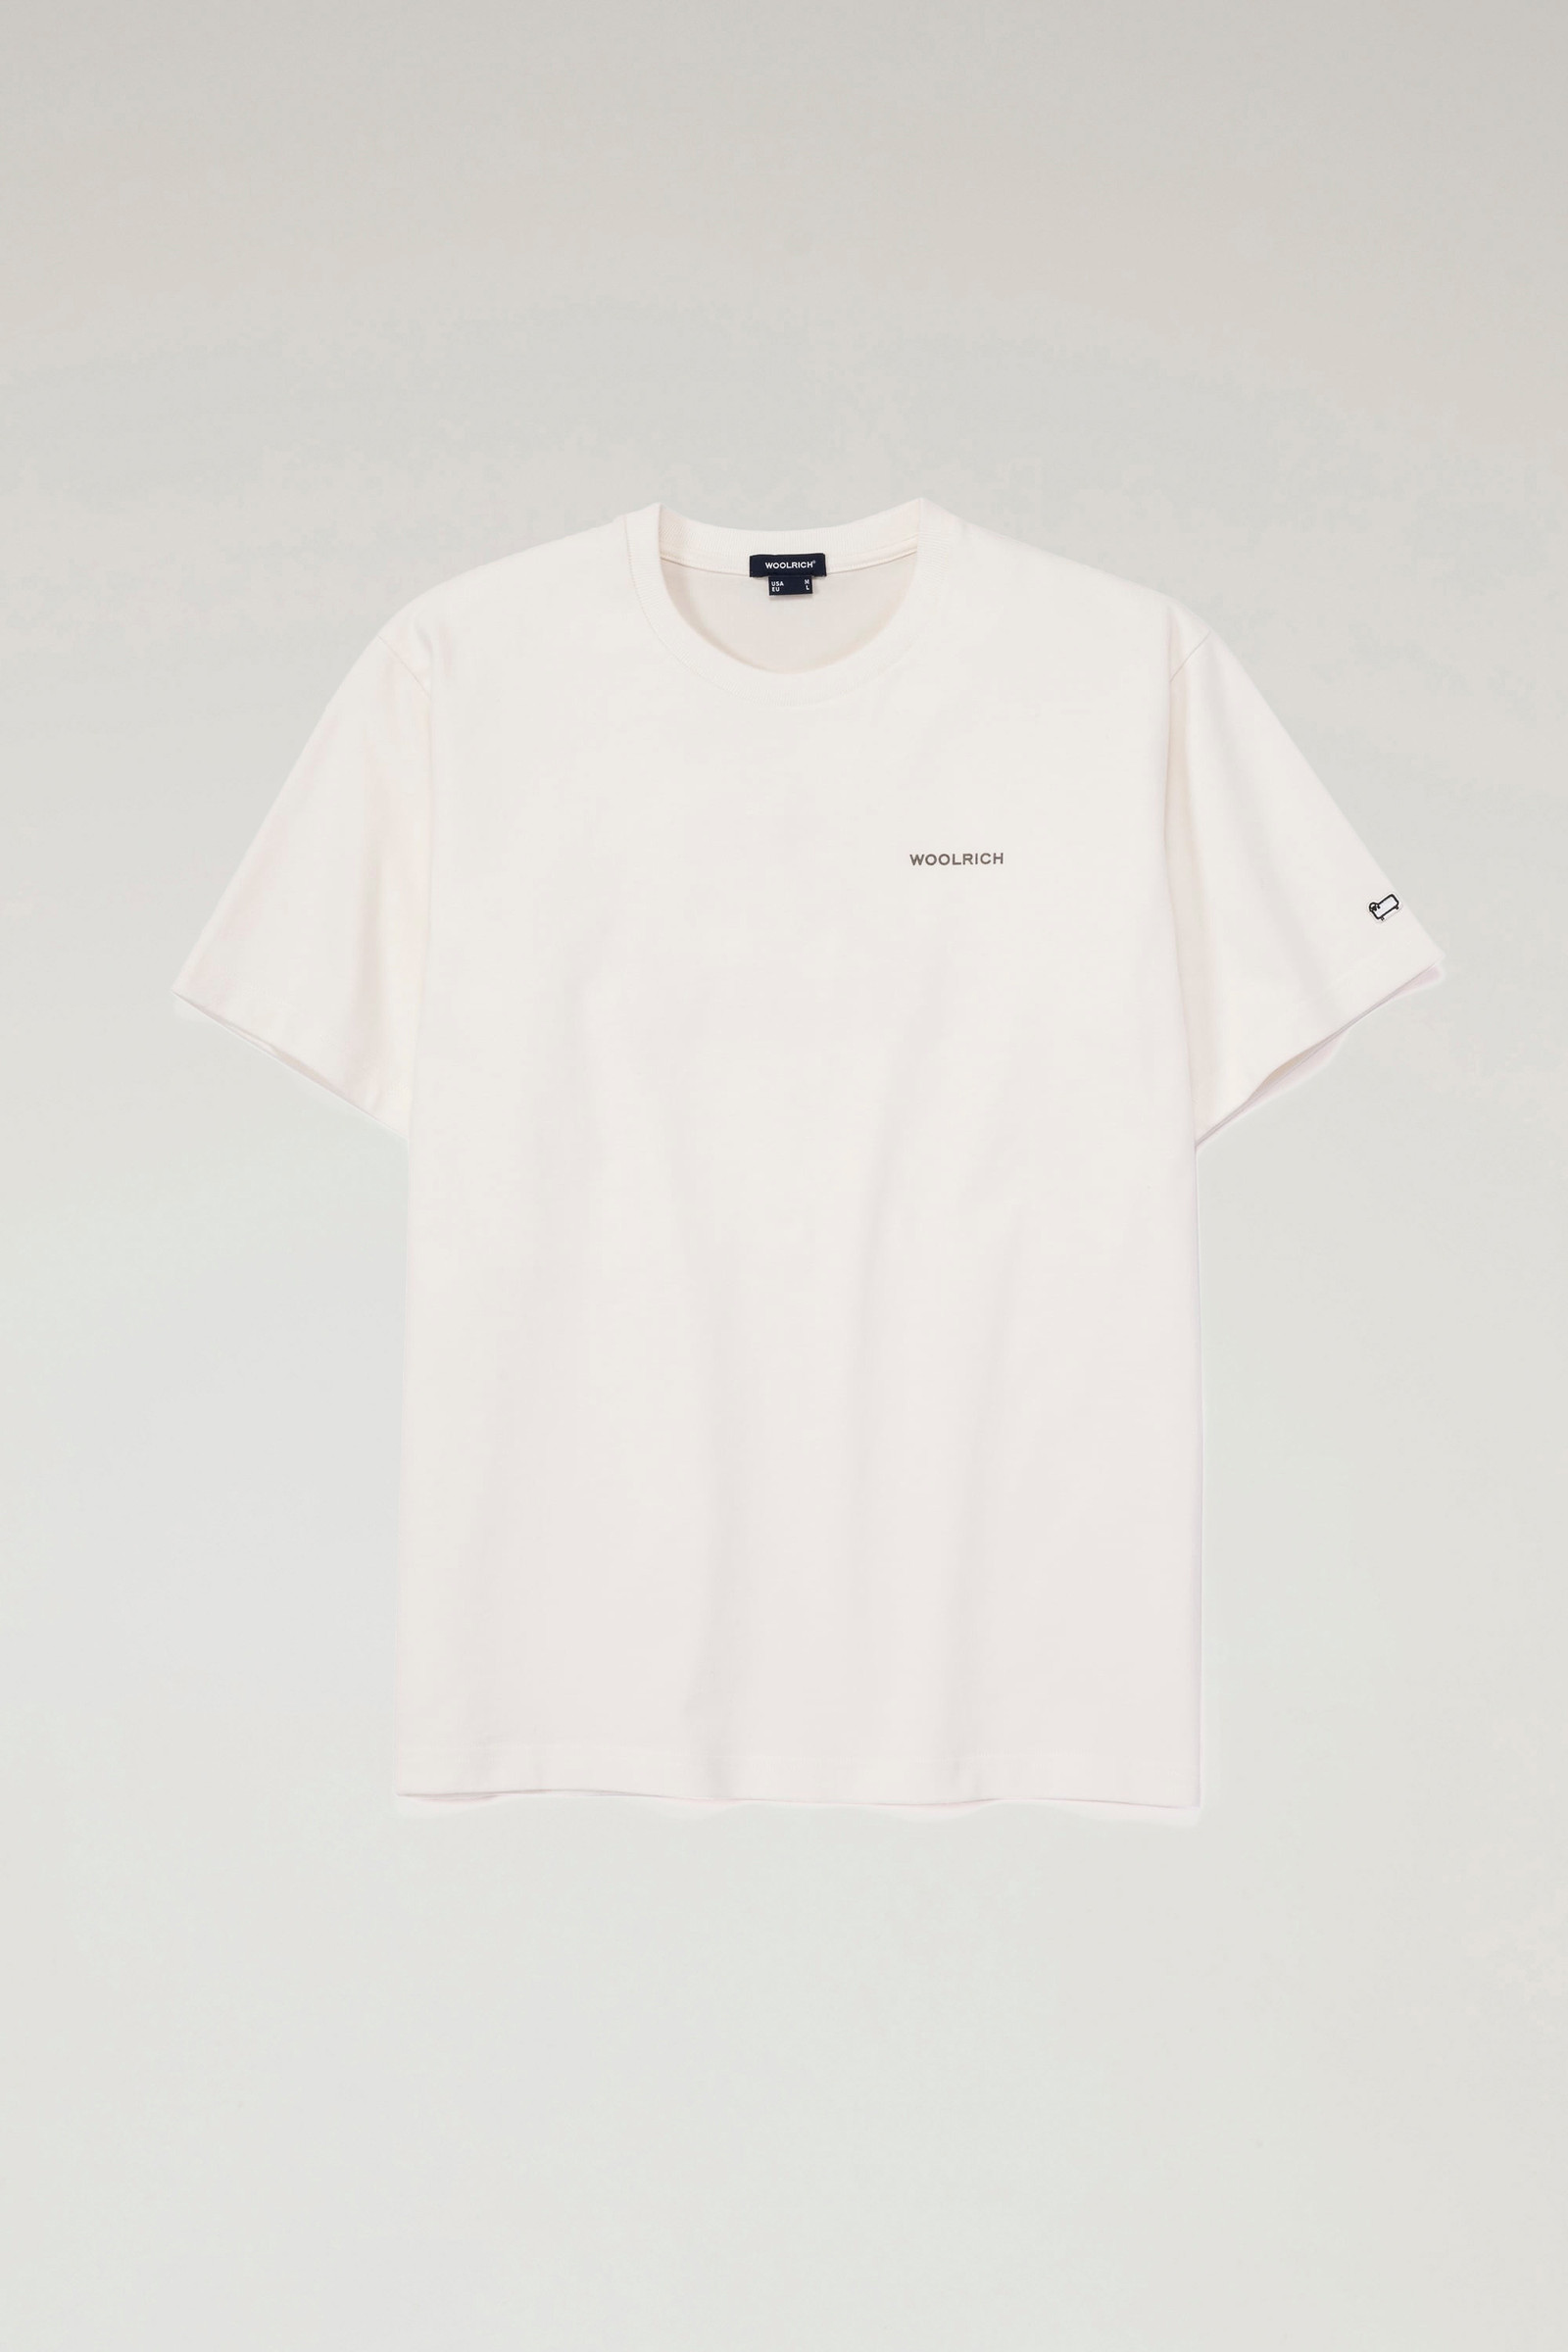 Men's T-shirt in Pure Cotton with Back Print White | Woolrich USA